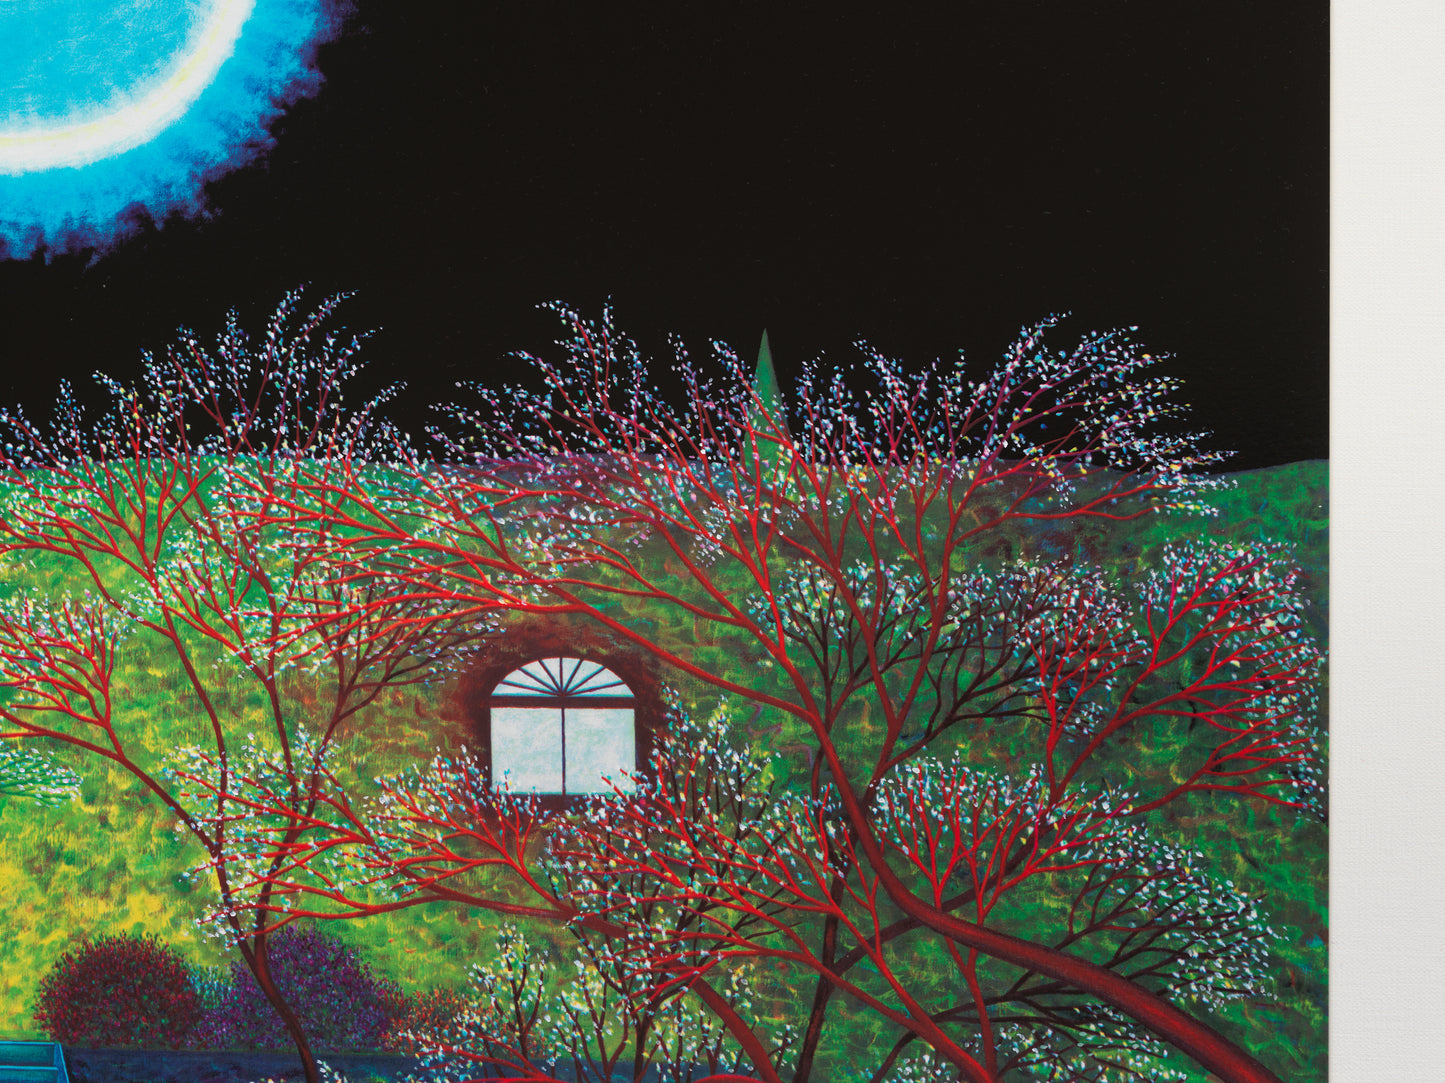 Scott Kahn - Spring Moon, Grant Street - Hand-finished Limited Edition Screenprint - 25.6in x 29.5in - 2